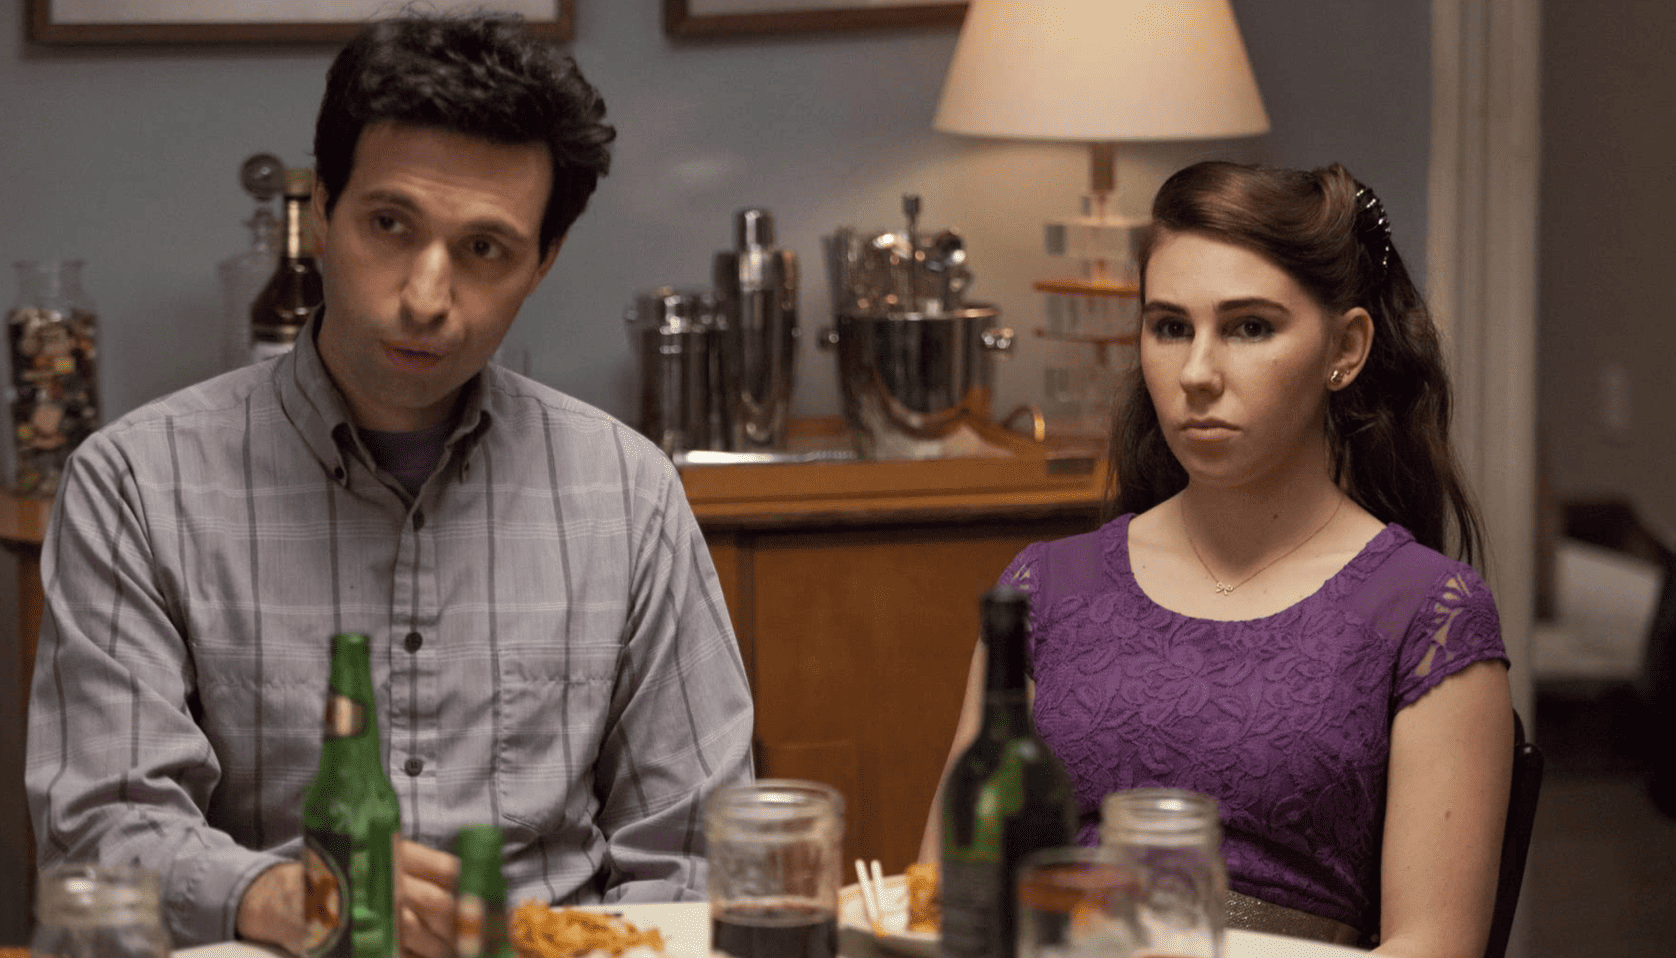 Ray and Shosh sitting together at the dinner table and staring off-camera in this image from Apatow Productions